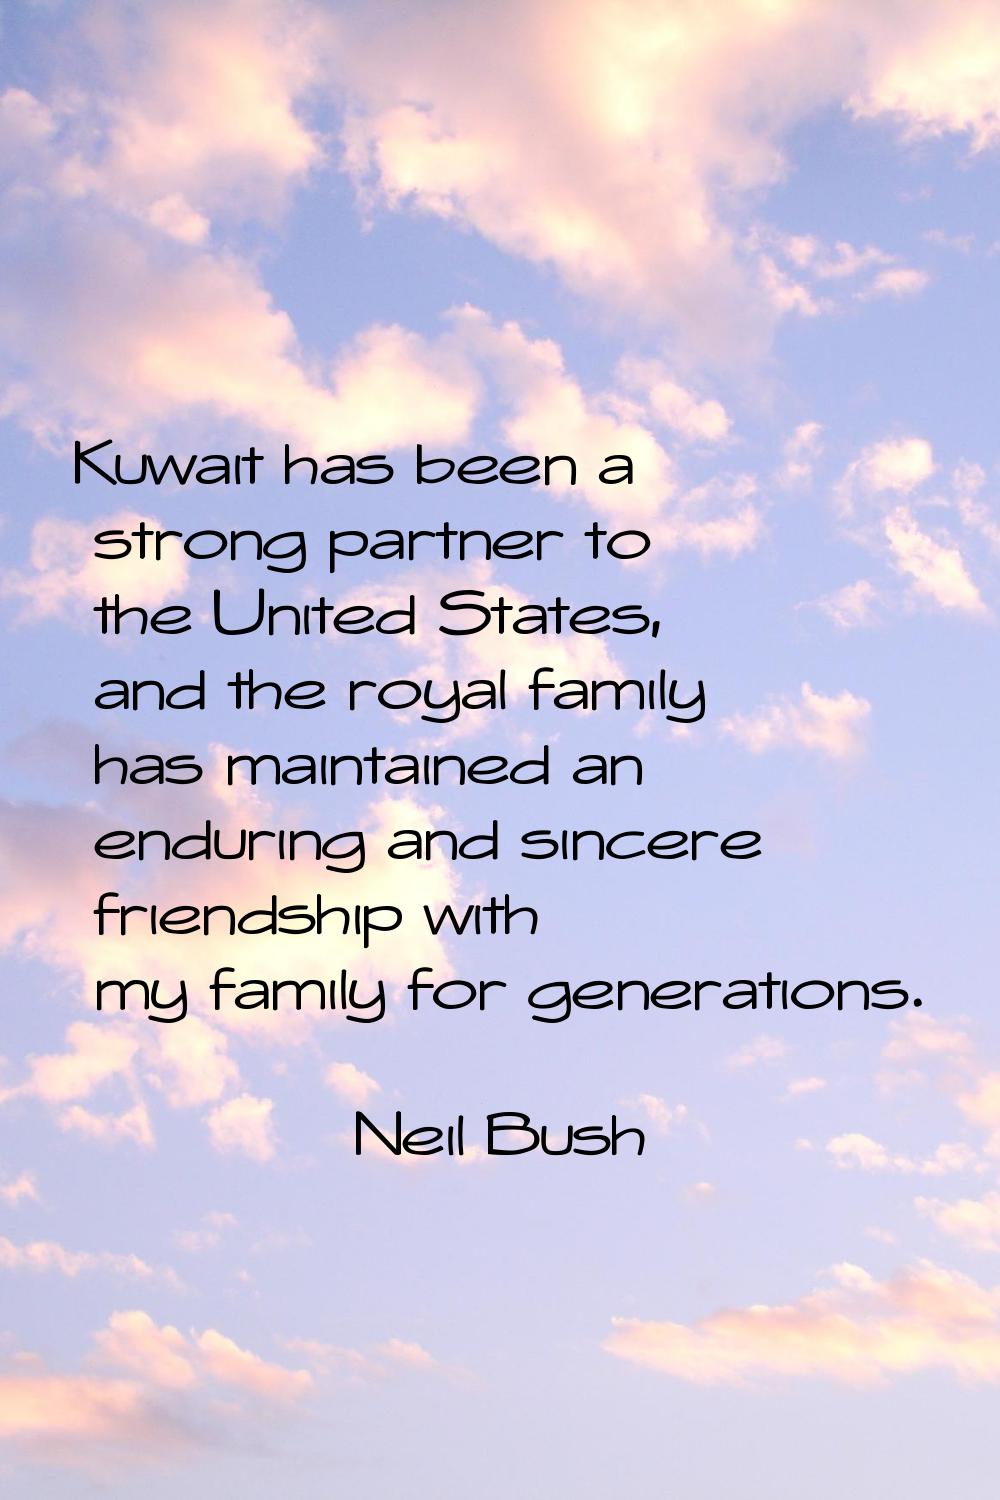 Kuwait has been a strong partner to the United States, and the royal family has maintained an endur